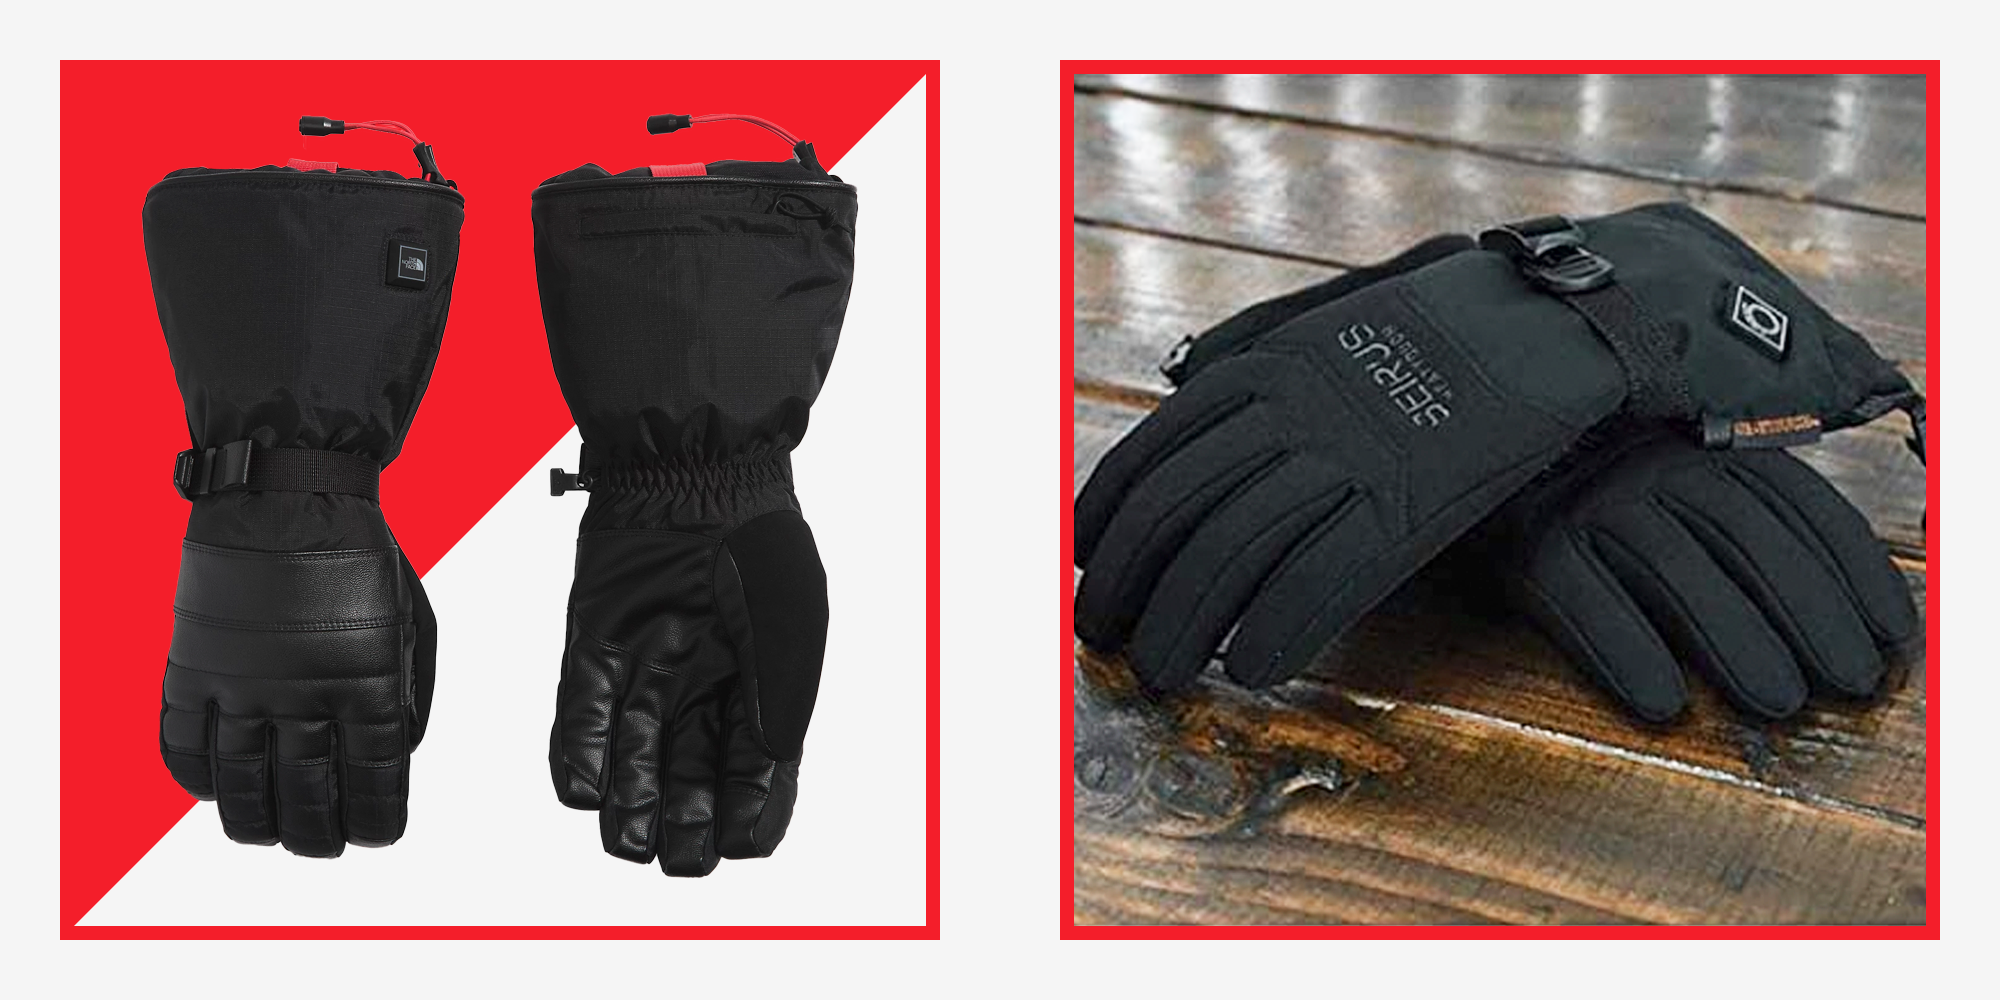 https://hips.hearstapps.com/hmg-prod/images/mh-1-4-heated-gloves-1672934542.png